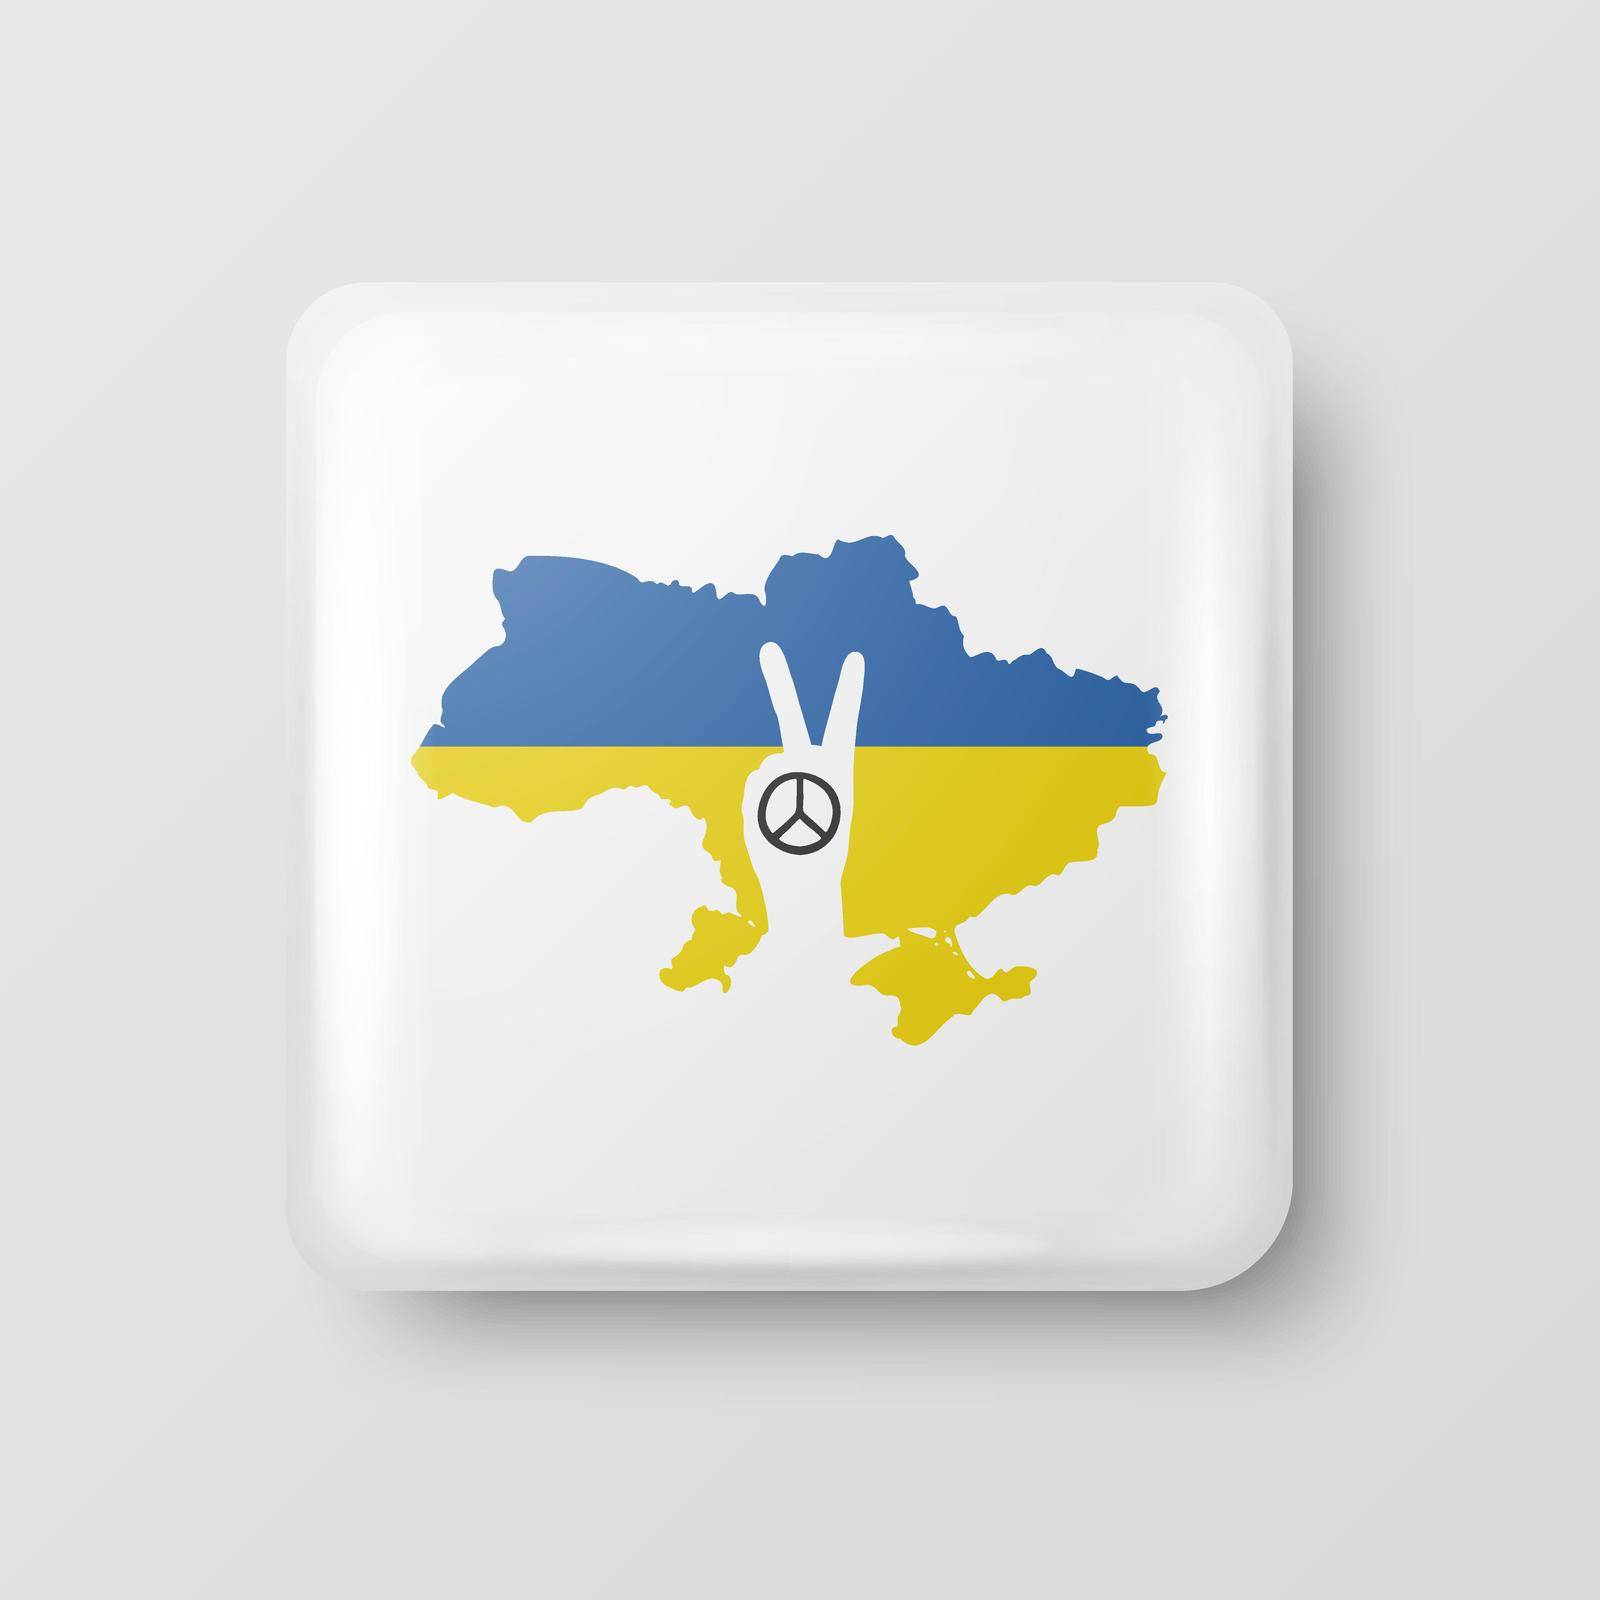 Peace for Ukraine. Button Pin Badge with Anti-war Call. Struggle, Protest, Support Ukraine, Fist with Ukrainian War. Vector Illustration. Slogan, Call for Support for Ukraine.